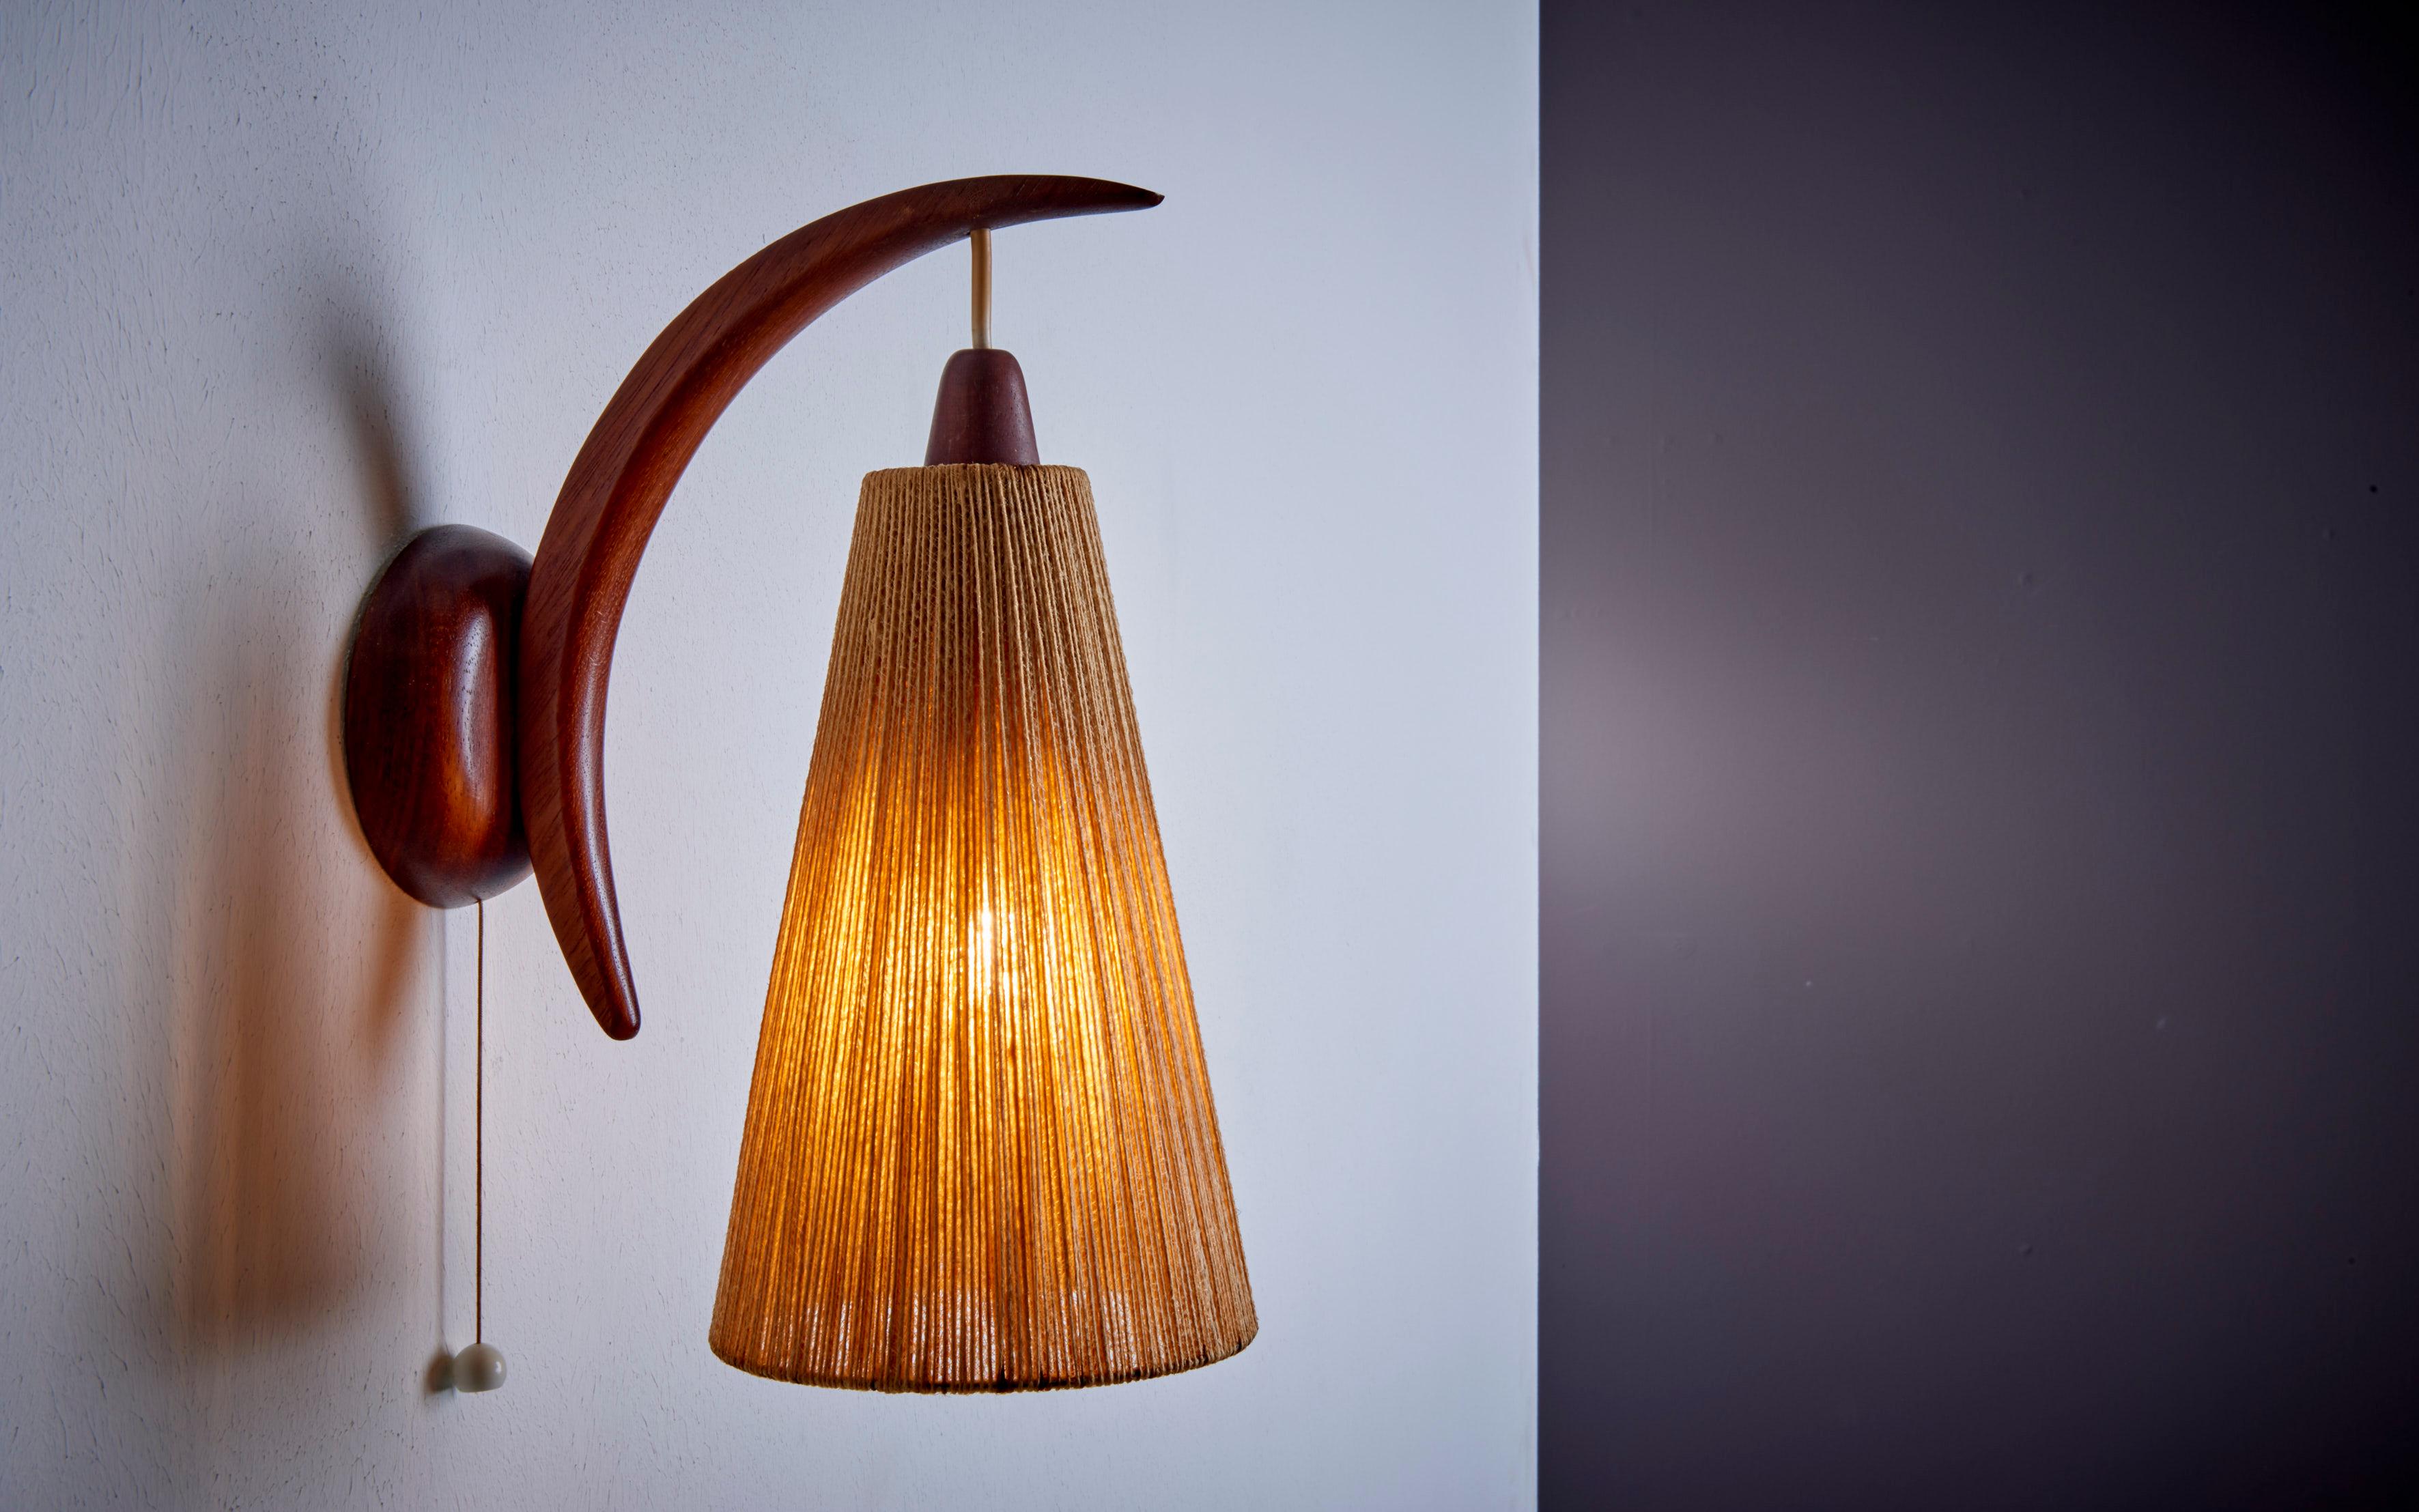 Wall lamp in teak with cord shade by E.R. Nele for Temde, Switzerland, 1960s
1 x E14 bulb
Please note: Lamp should be fitted professionally in accordance to local requirements.